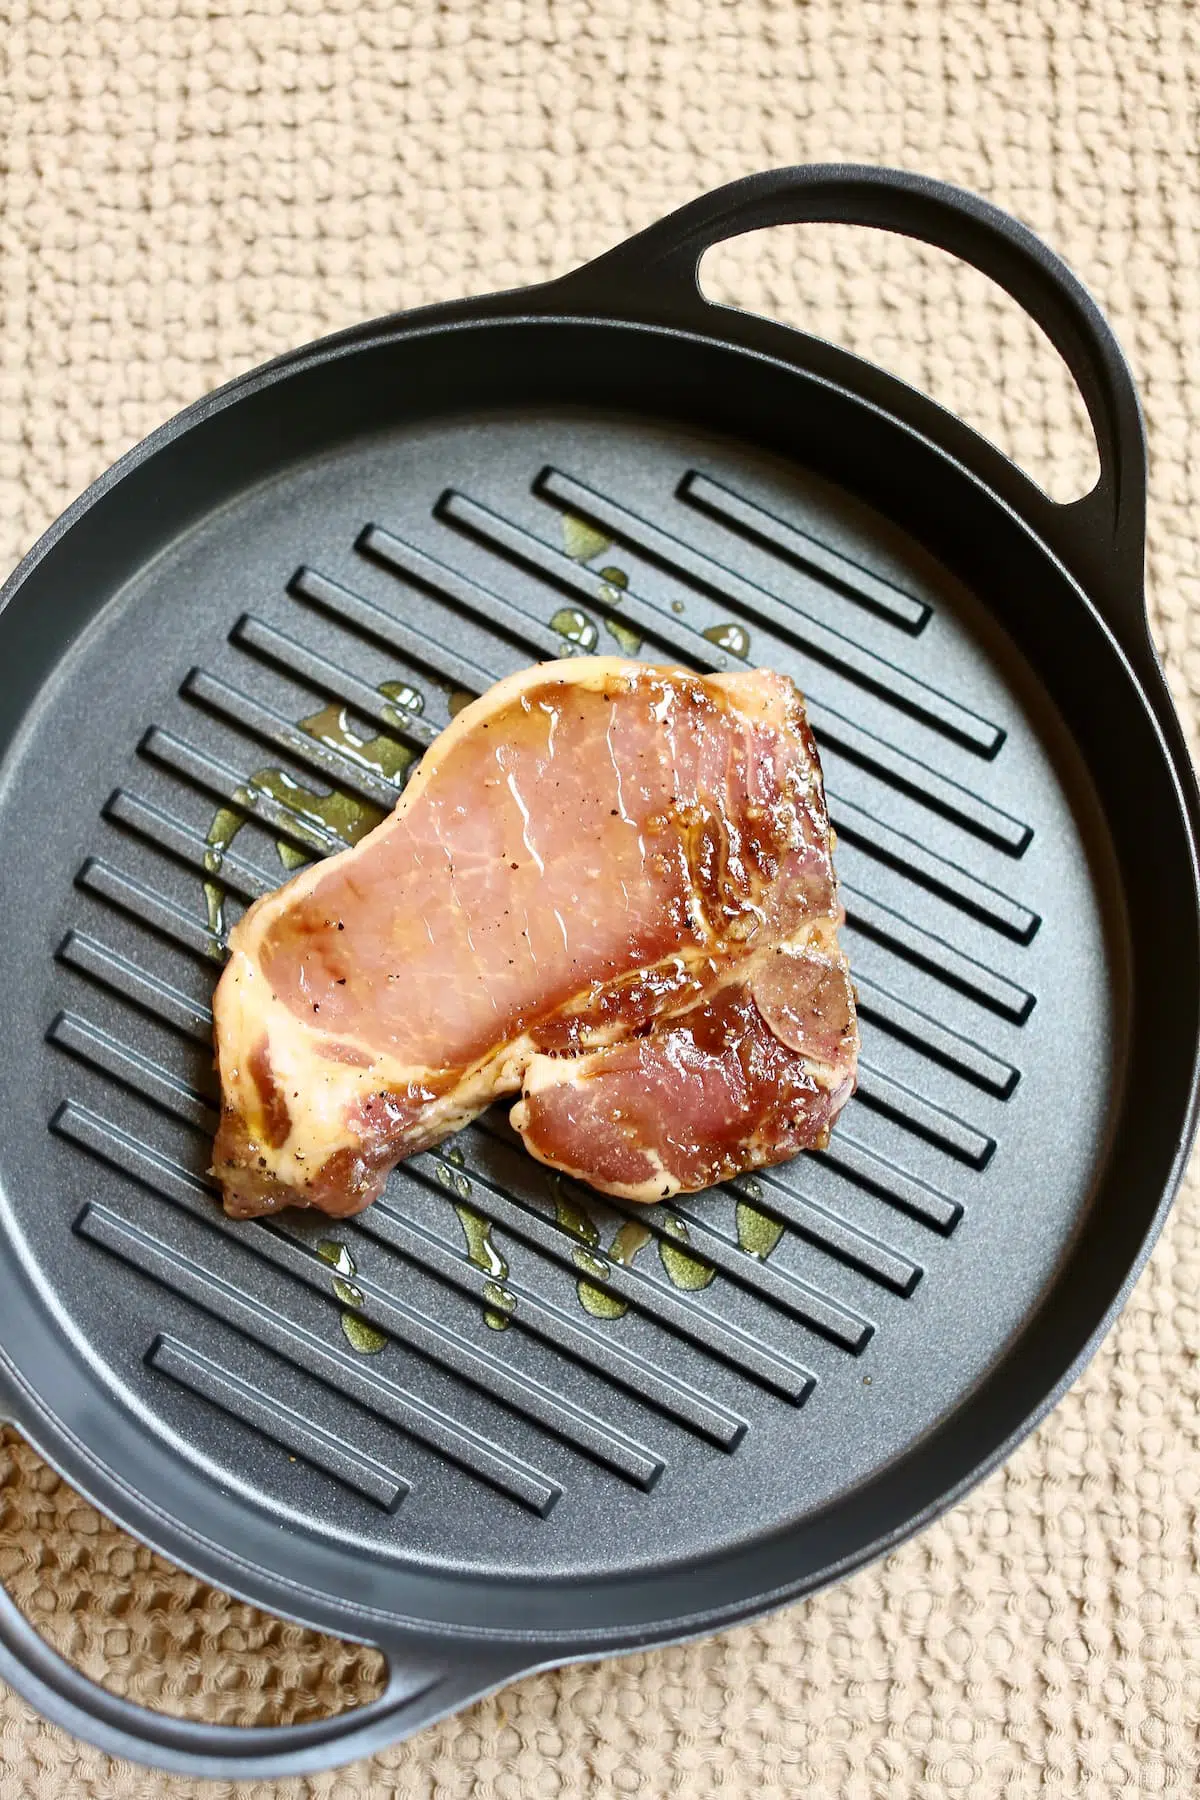 an uncooked pork chop in a grill pan.